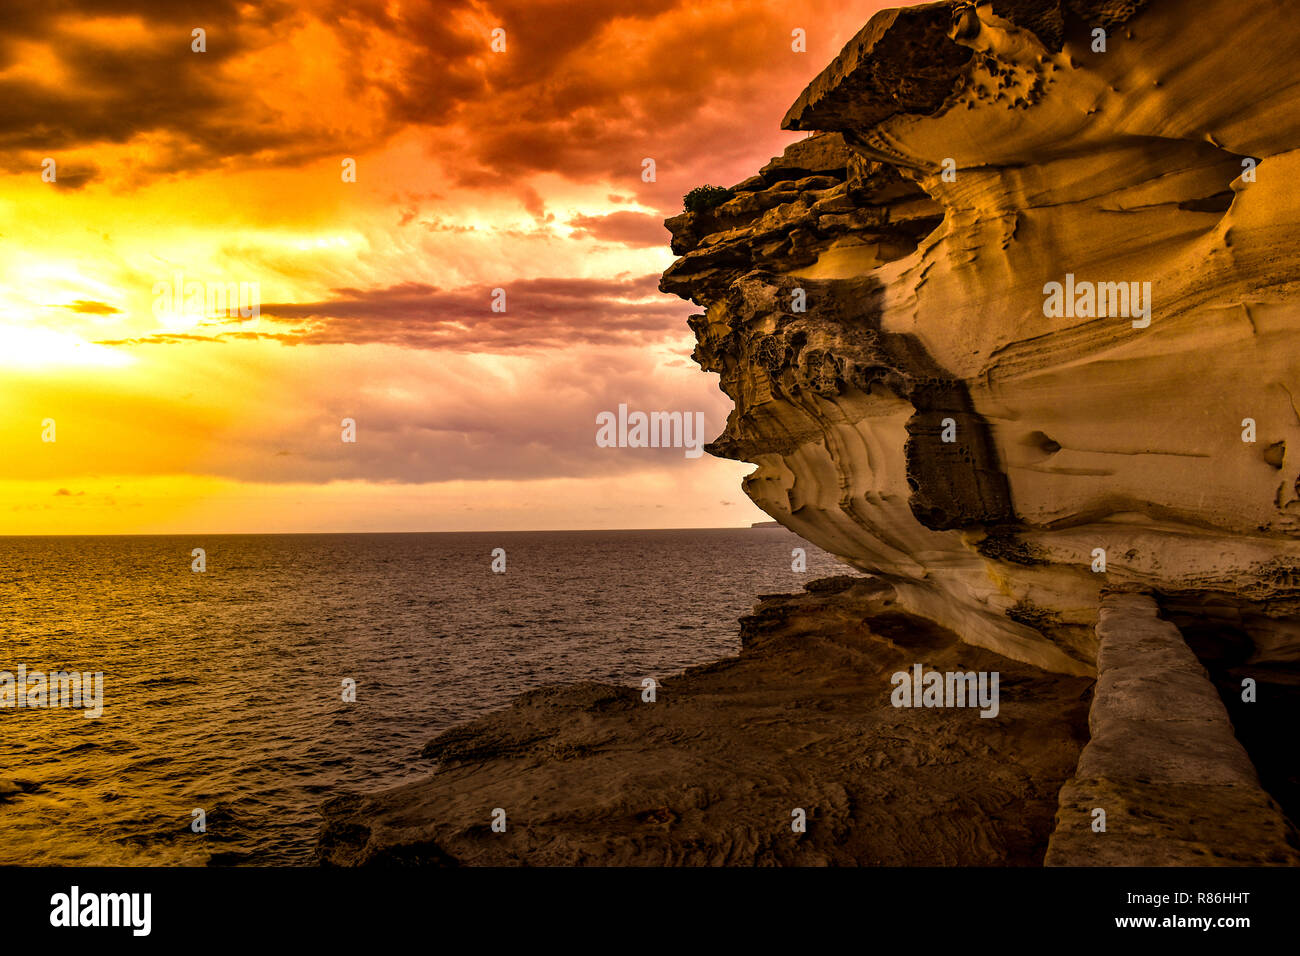 This beautiful scene of rocks and mountain on beach was captured during the sunset in a Stanwell Park Sydney NSW Australia. Stock Photo